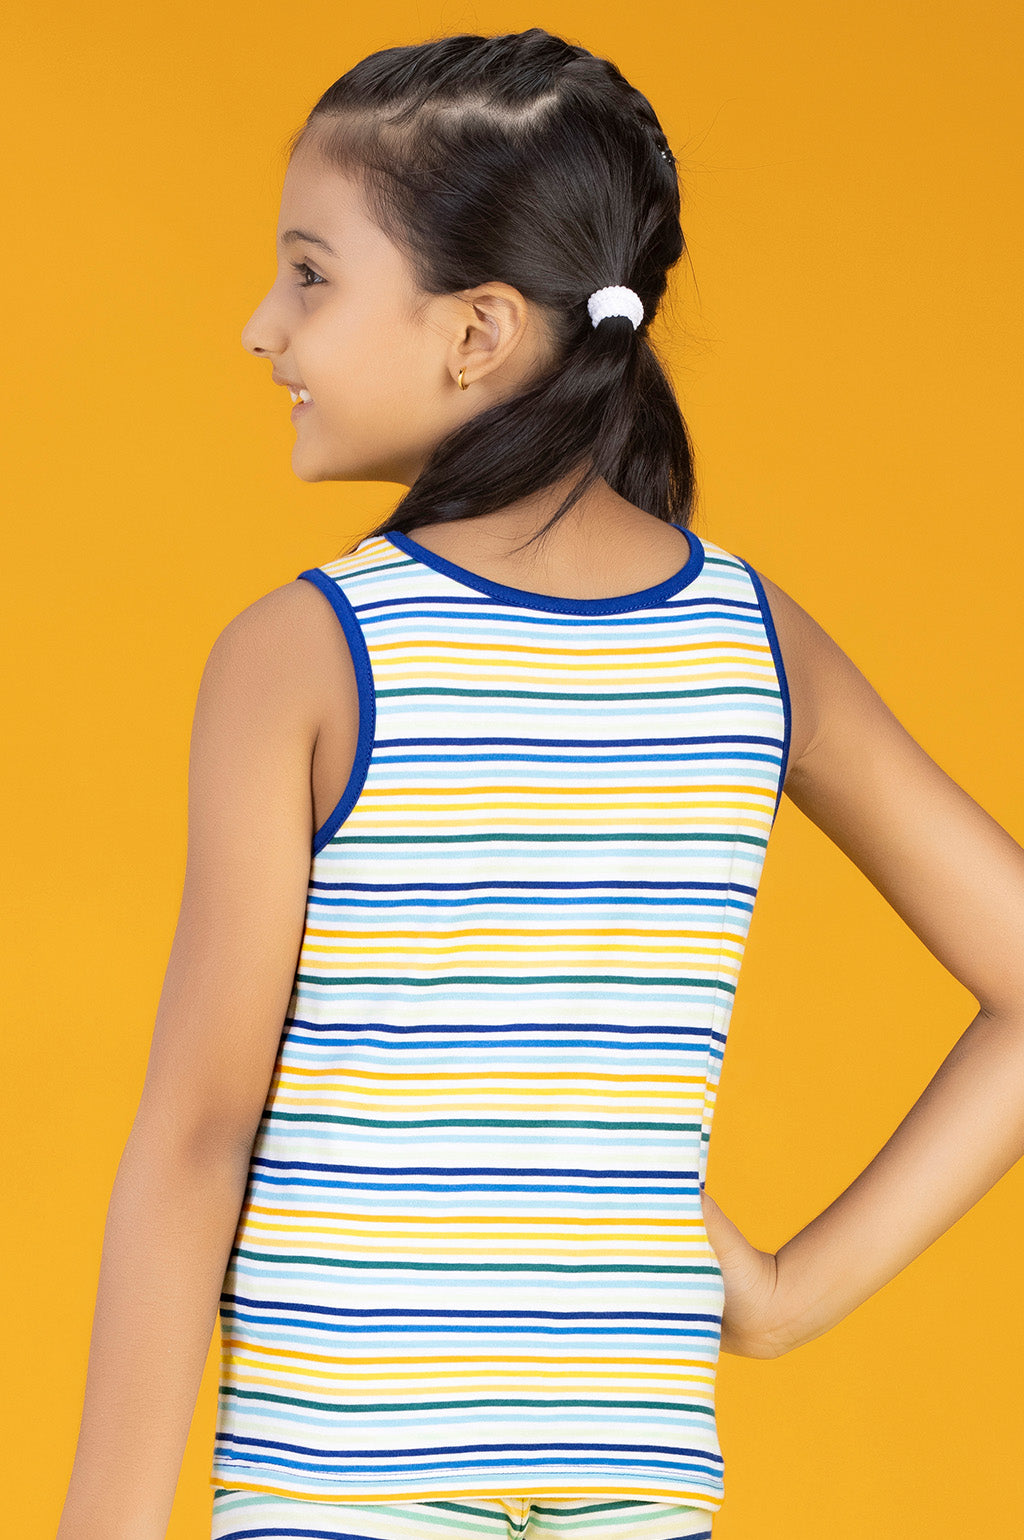 Girls tank top arcade combed cotton yellow - XYLife Kids Wear